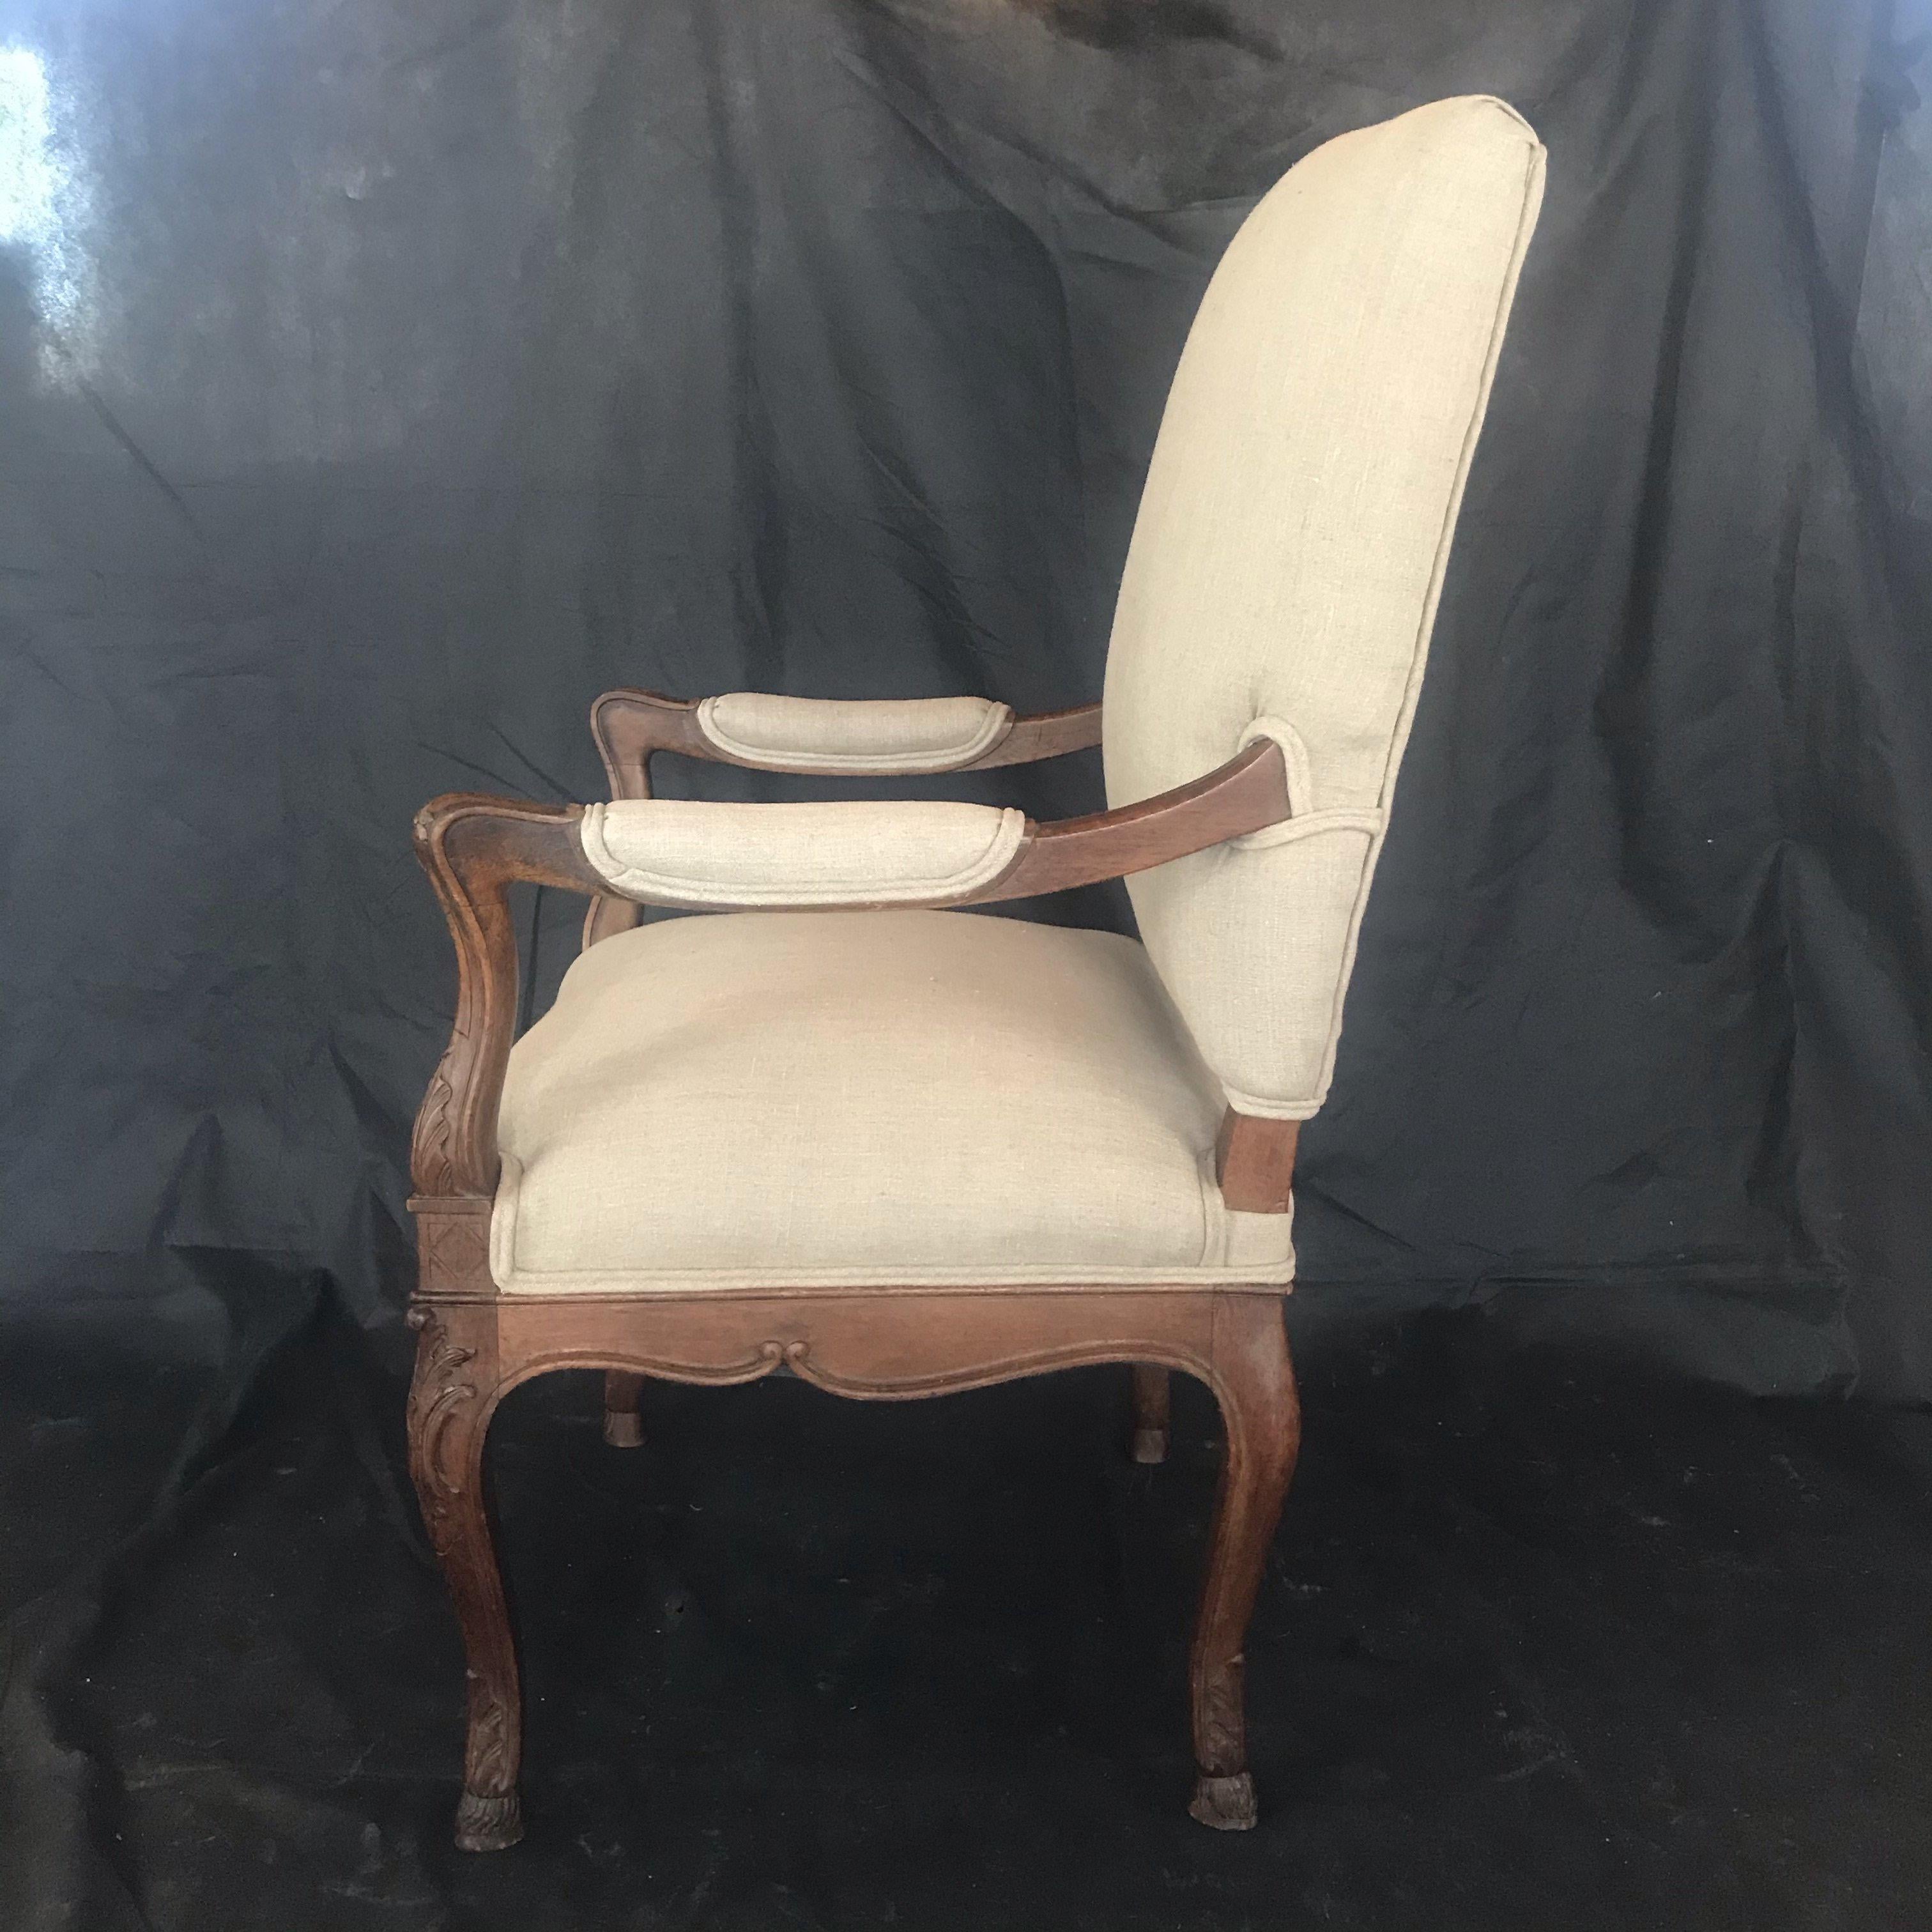 Upholstery 19th Century French Carved Regency Walnut Chair with Fabulous Hoof Feet For Sale